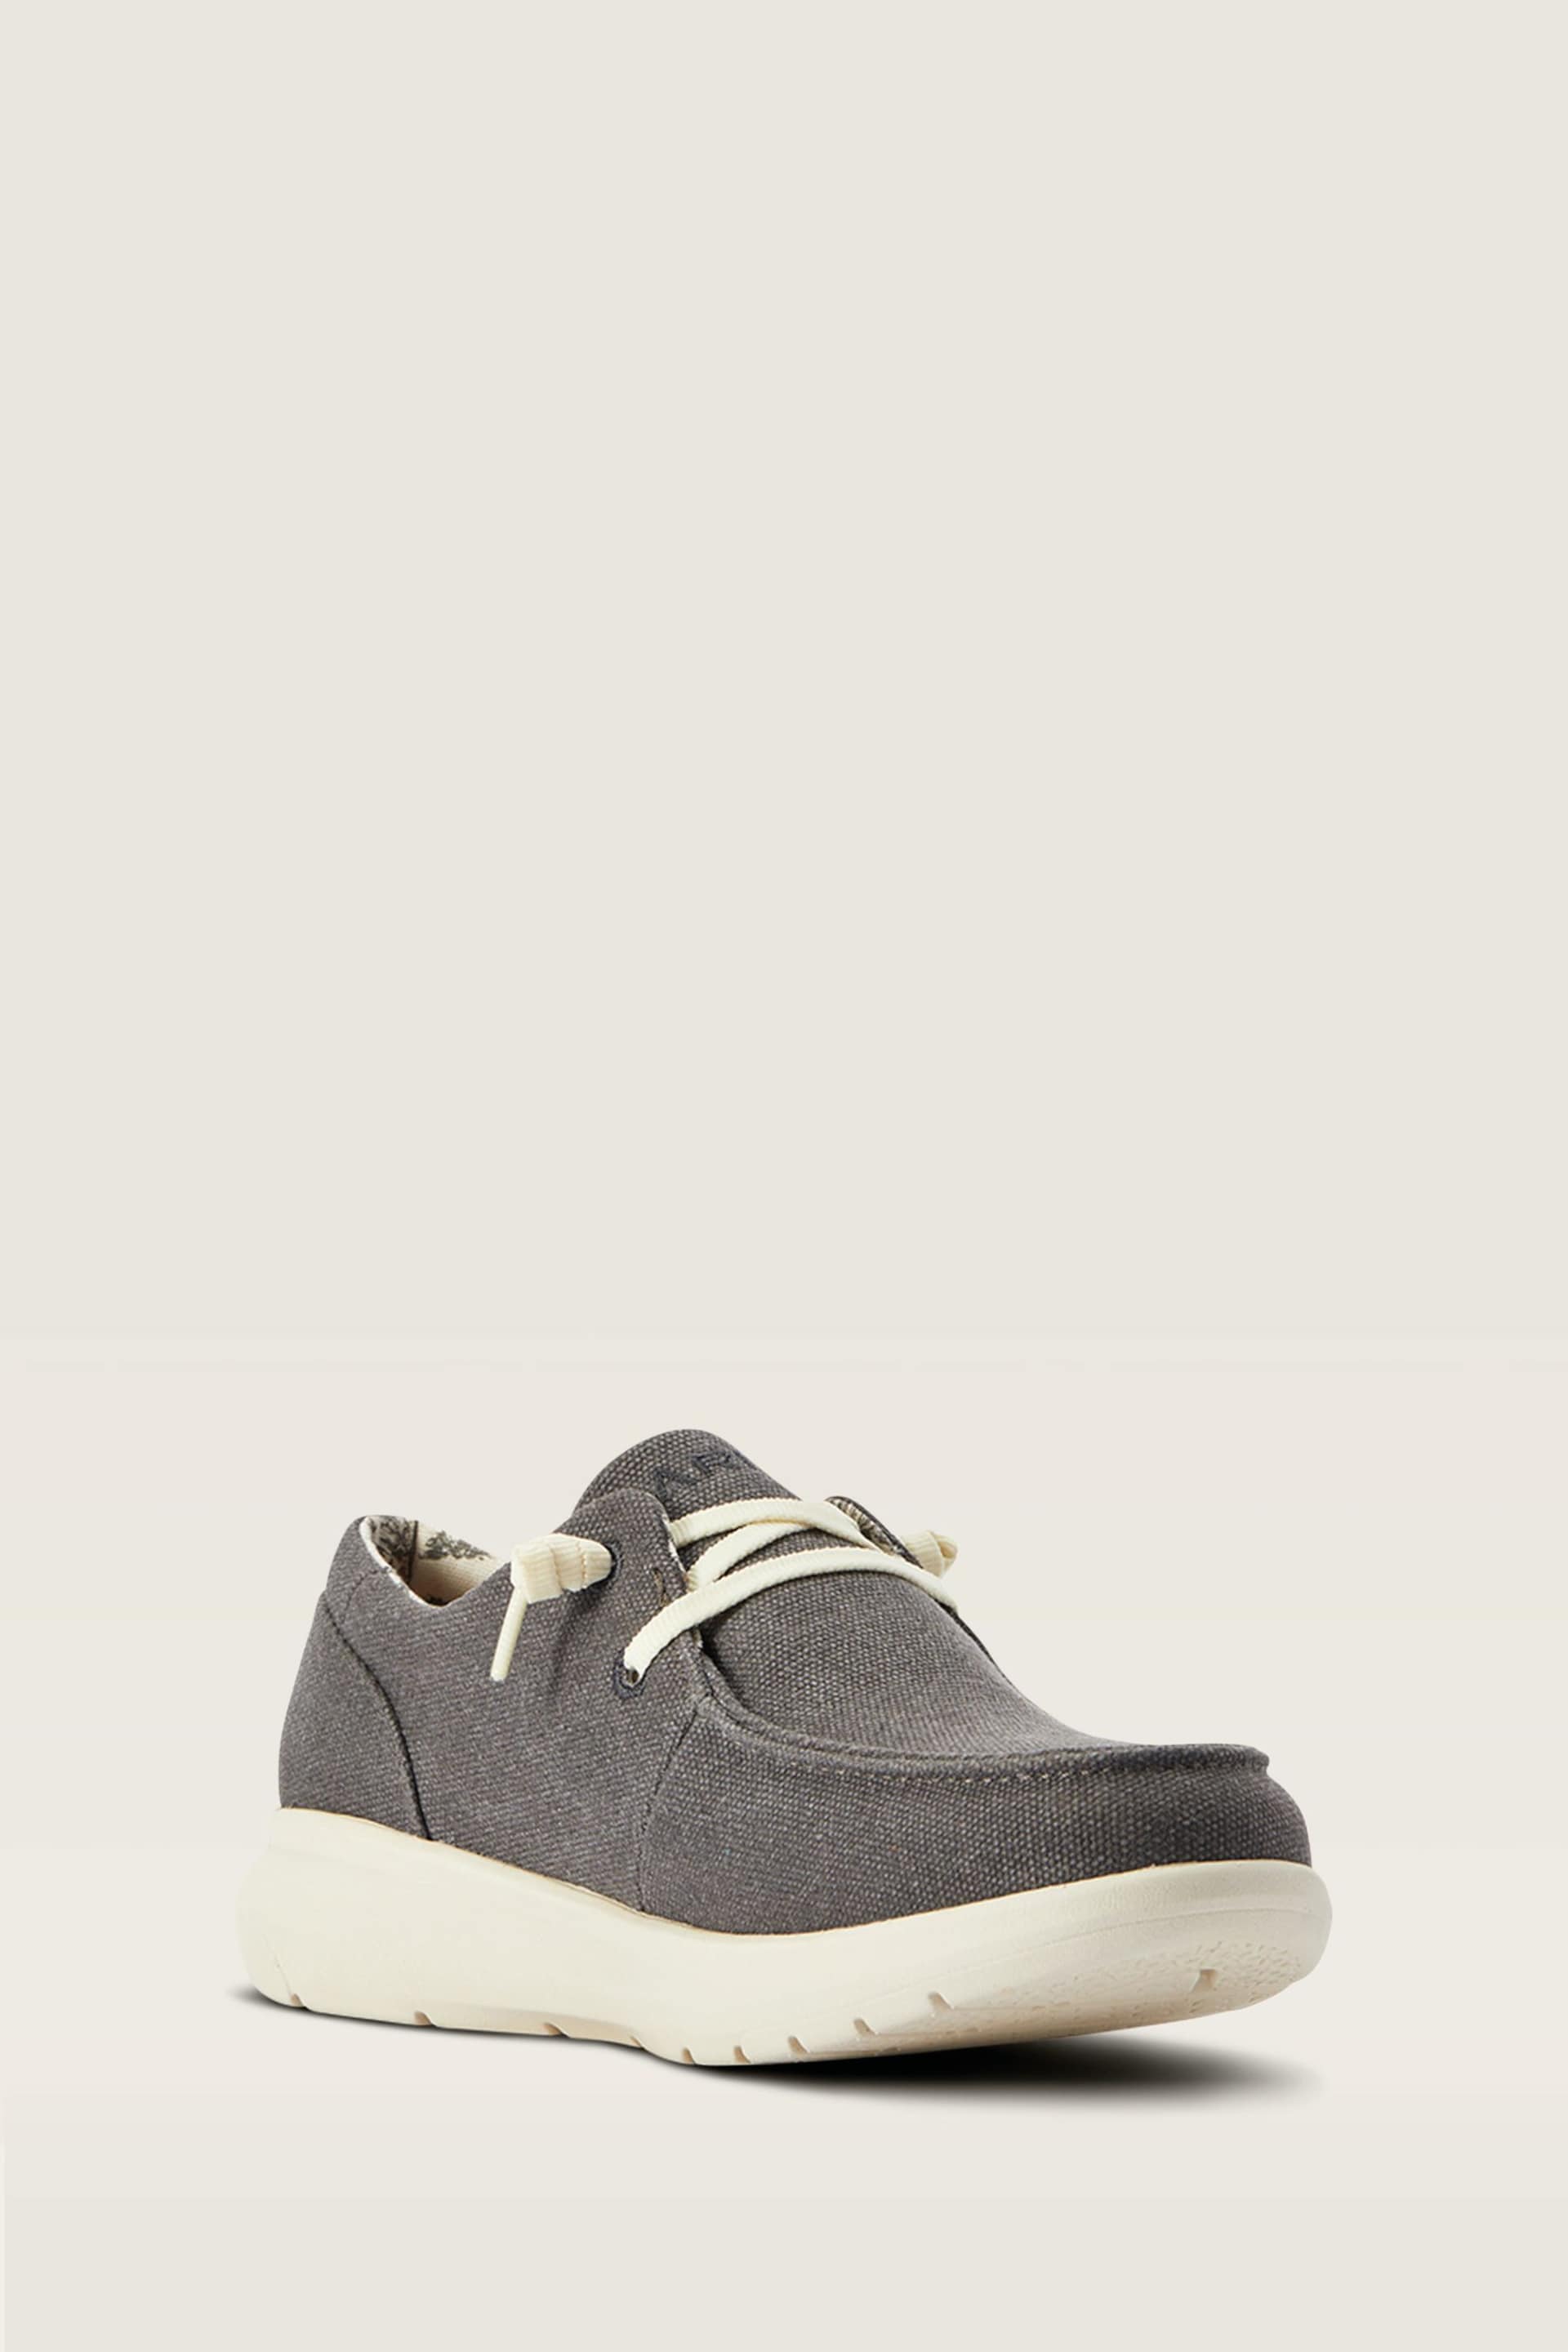 Ariat Hilo Casual Canvas Black Shoes - Image 2 of 7